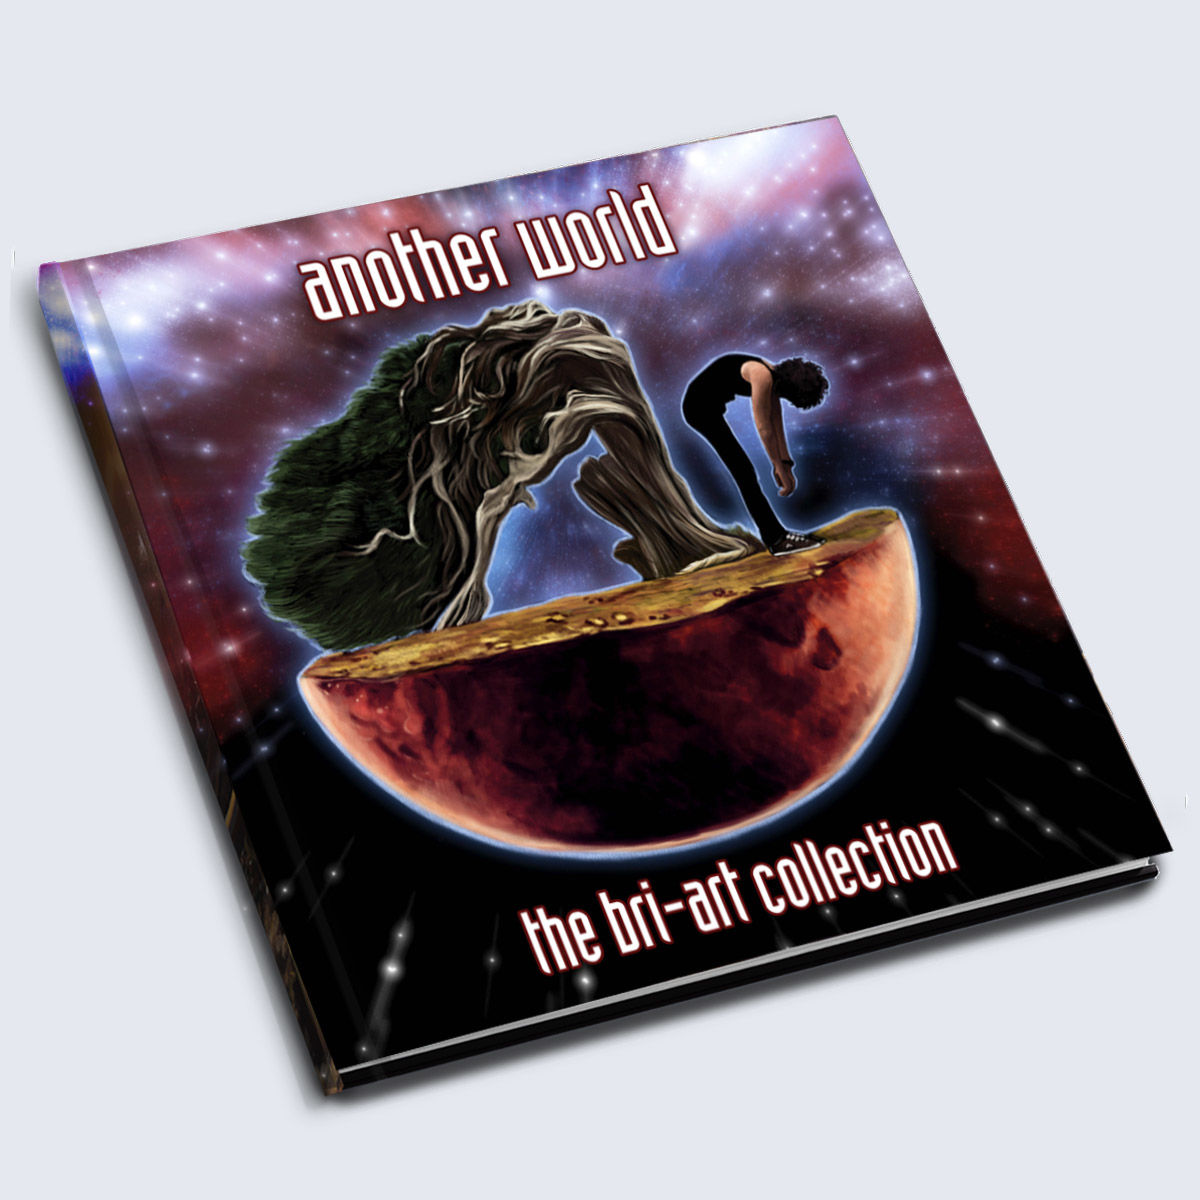 Brian May - Another World: The Bri-Art Collection